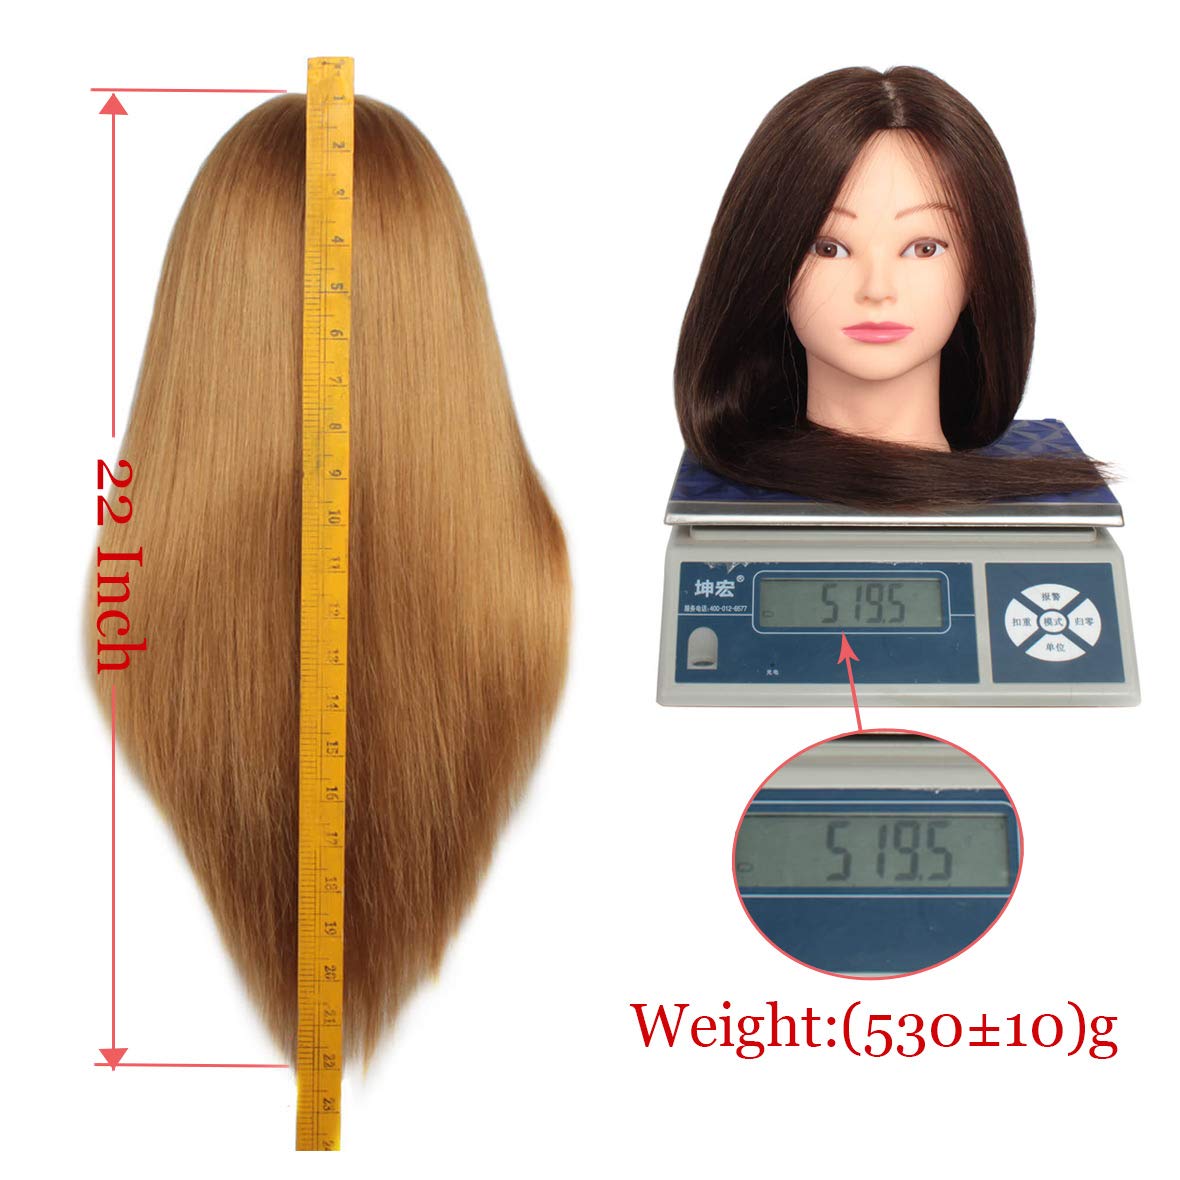 Mannequin Head with 60% Real Long Hair Hairdresser Practice Styling Training Head Manikin Training Head Cosmetology Doll Head Synthetic Fiber Hair and